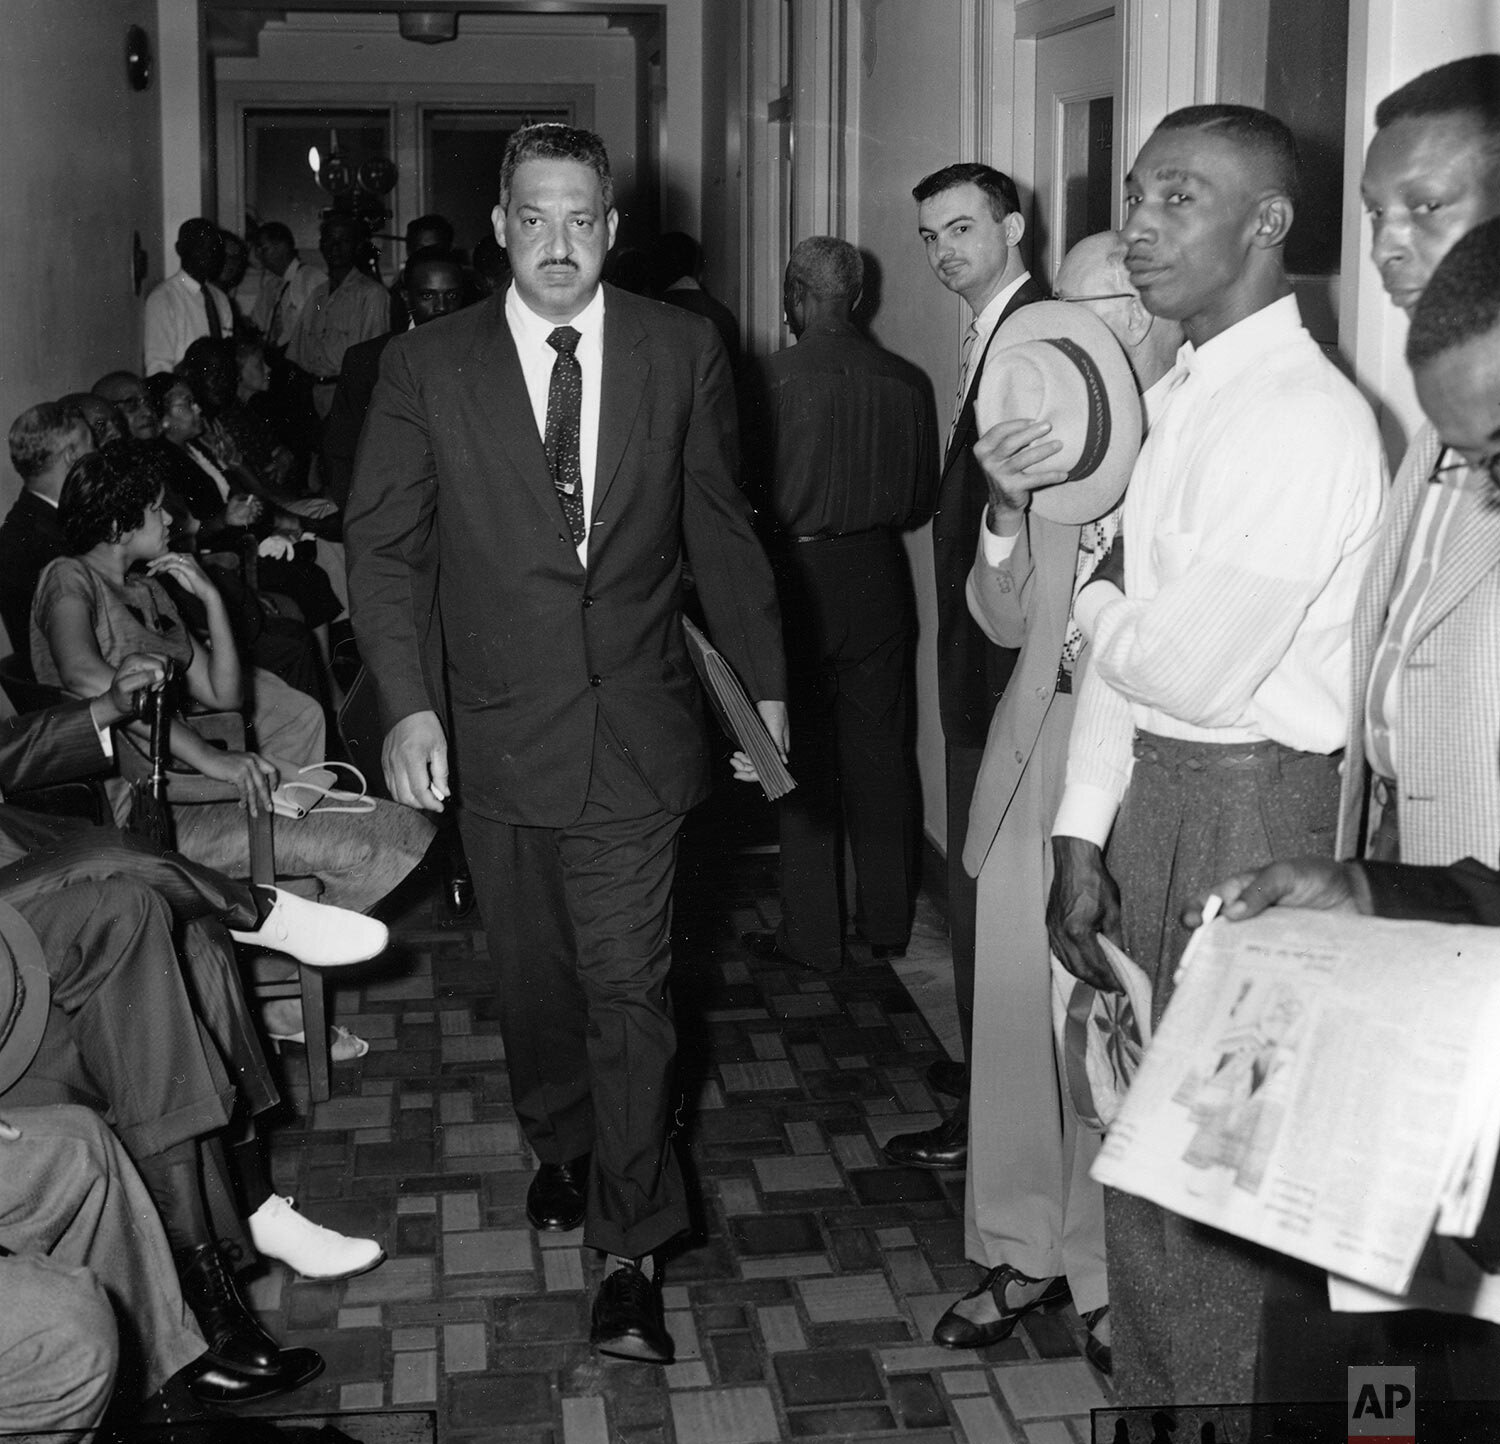  Thurgood Marshall, attorney for the National Association for the Advancement of Colored People, or NAACP, arrives at the U.S. District Court in Little Rock, Ark., on September 20, 1957. Federal Judge R. Davies is presiding over an injunction hearing